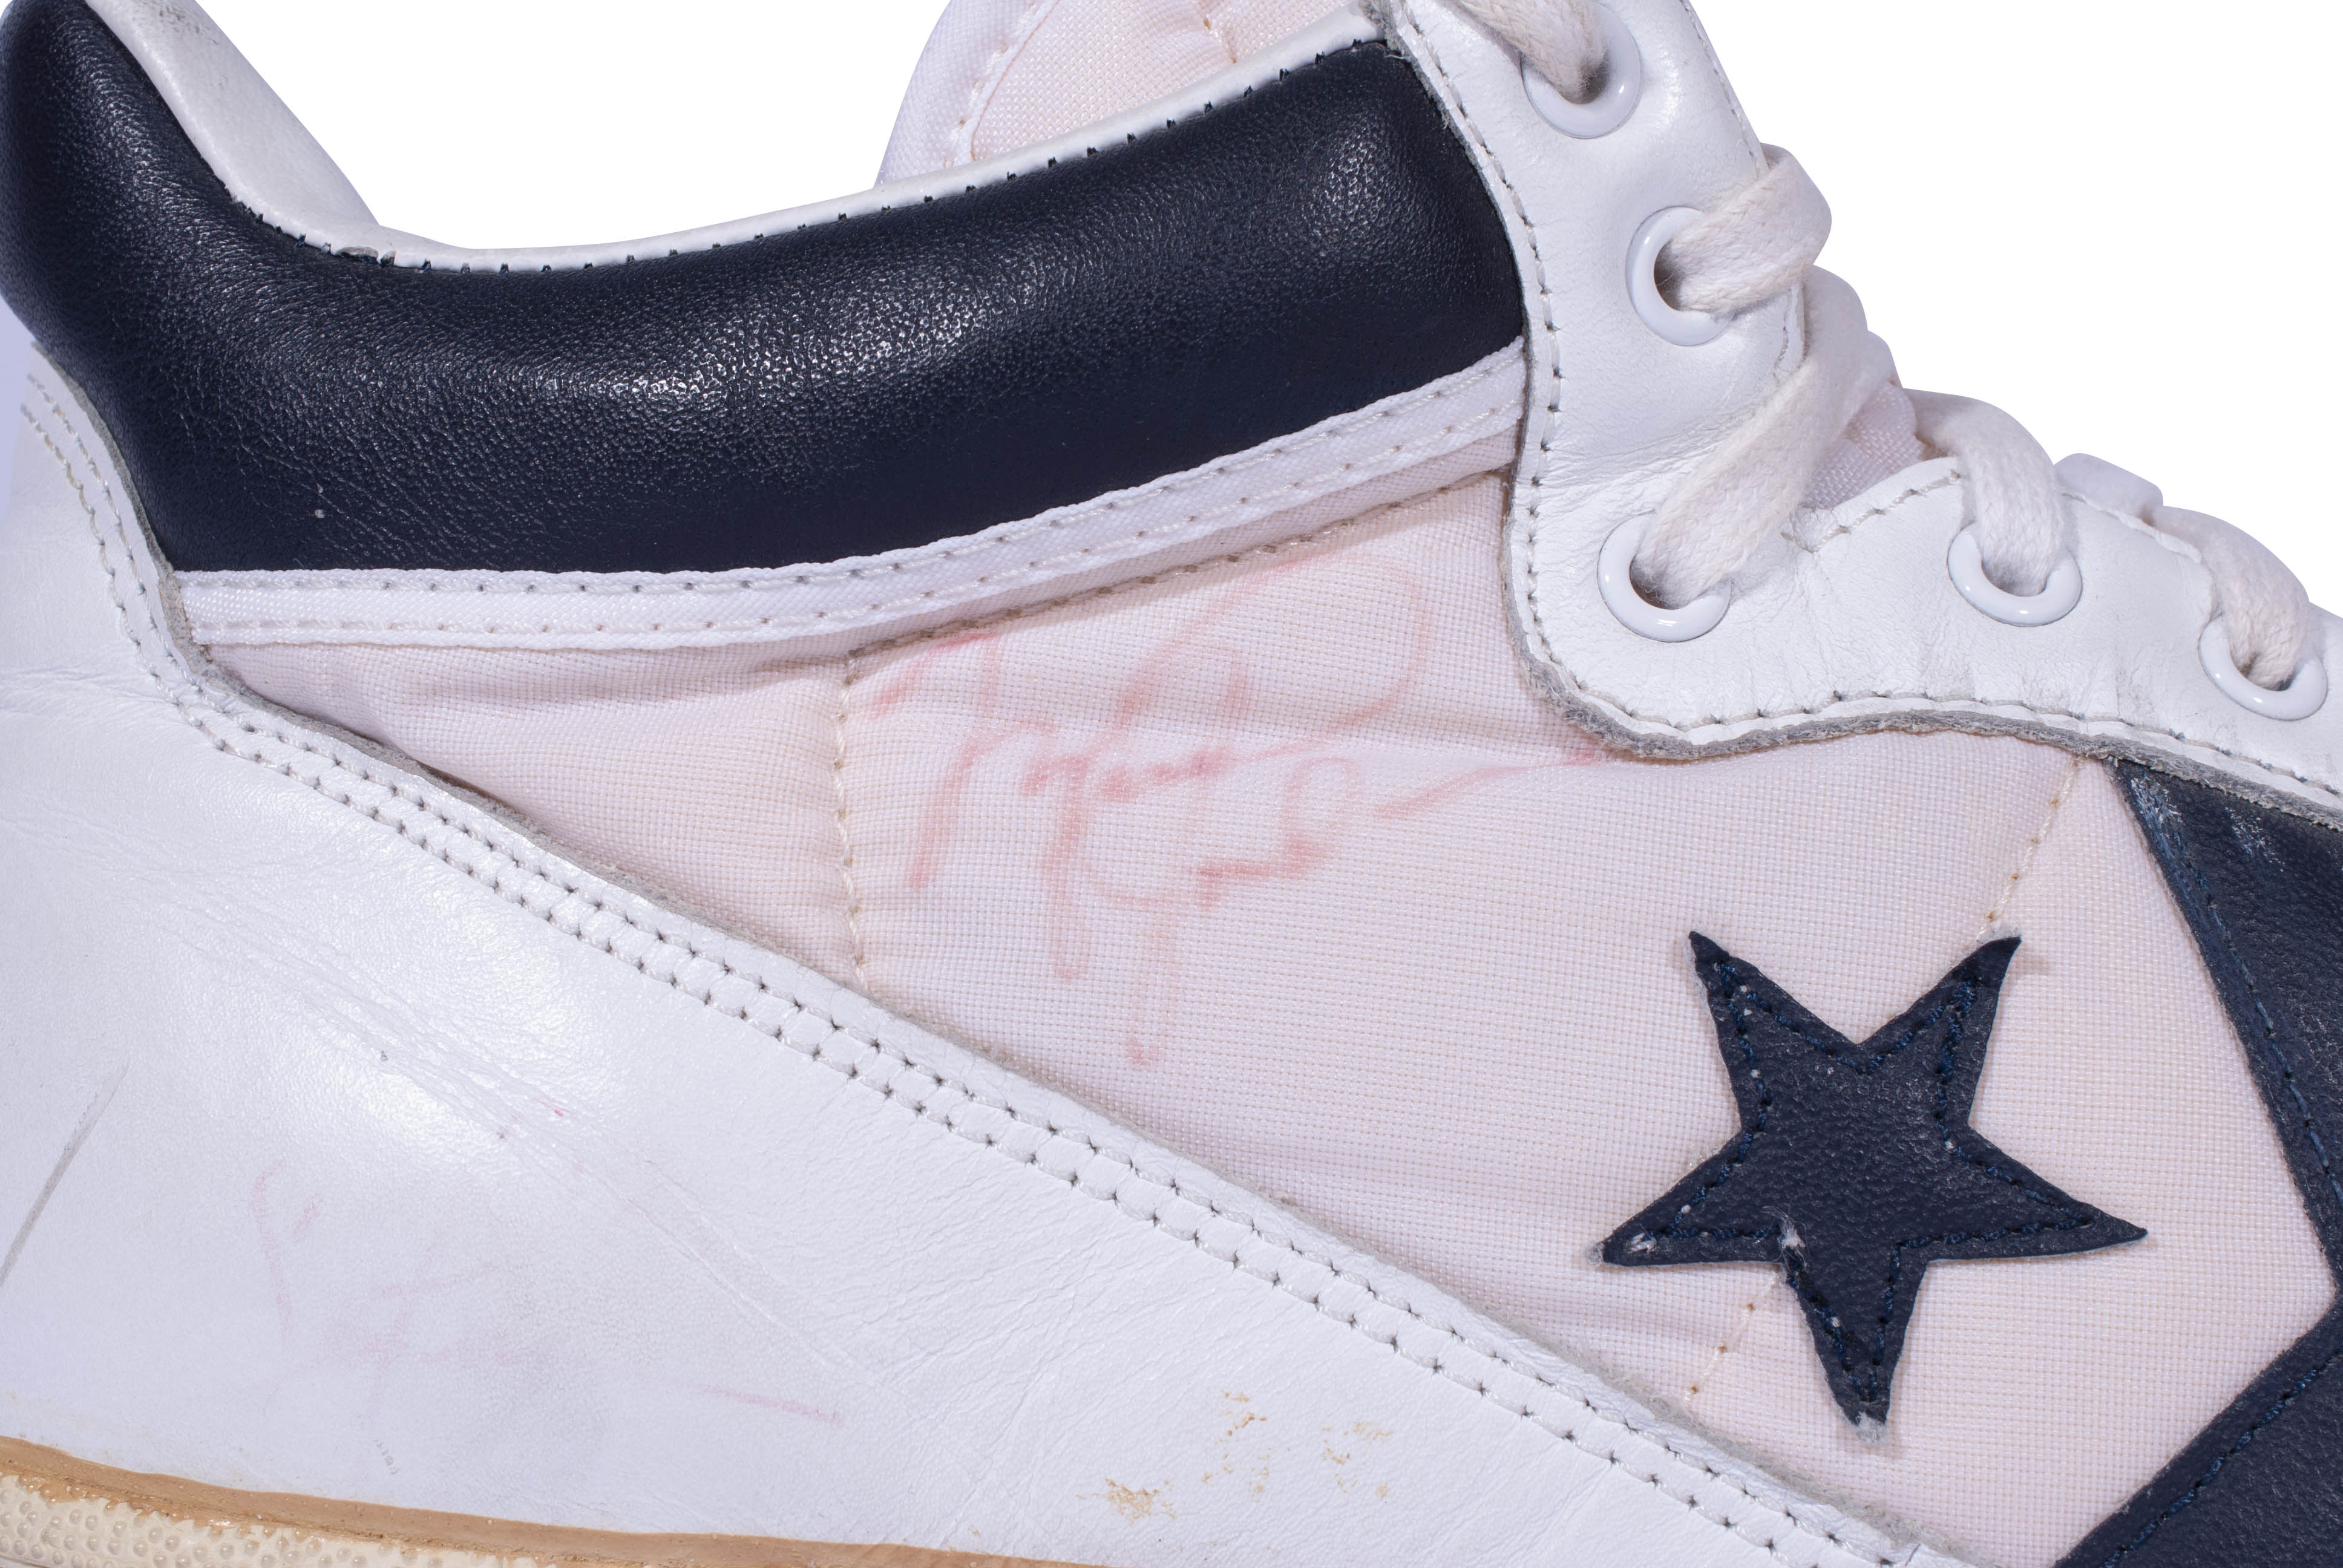 Michael Jordan's Converse sneakers from 1984 Olympics up for